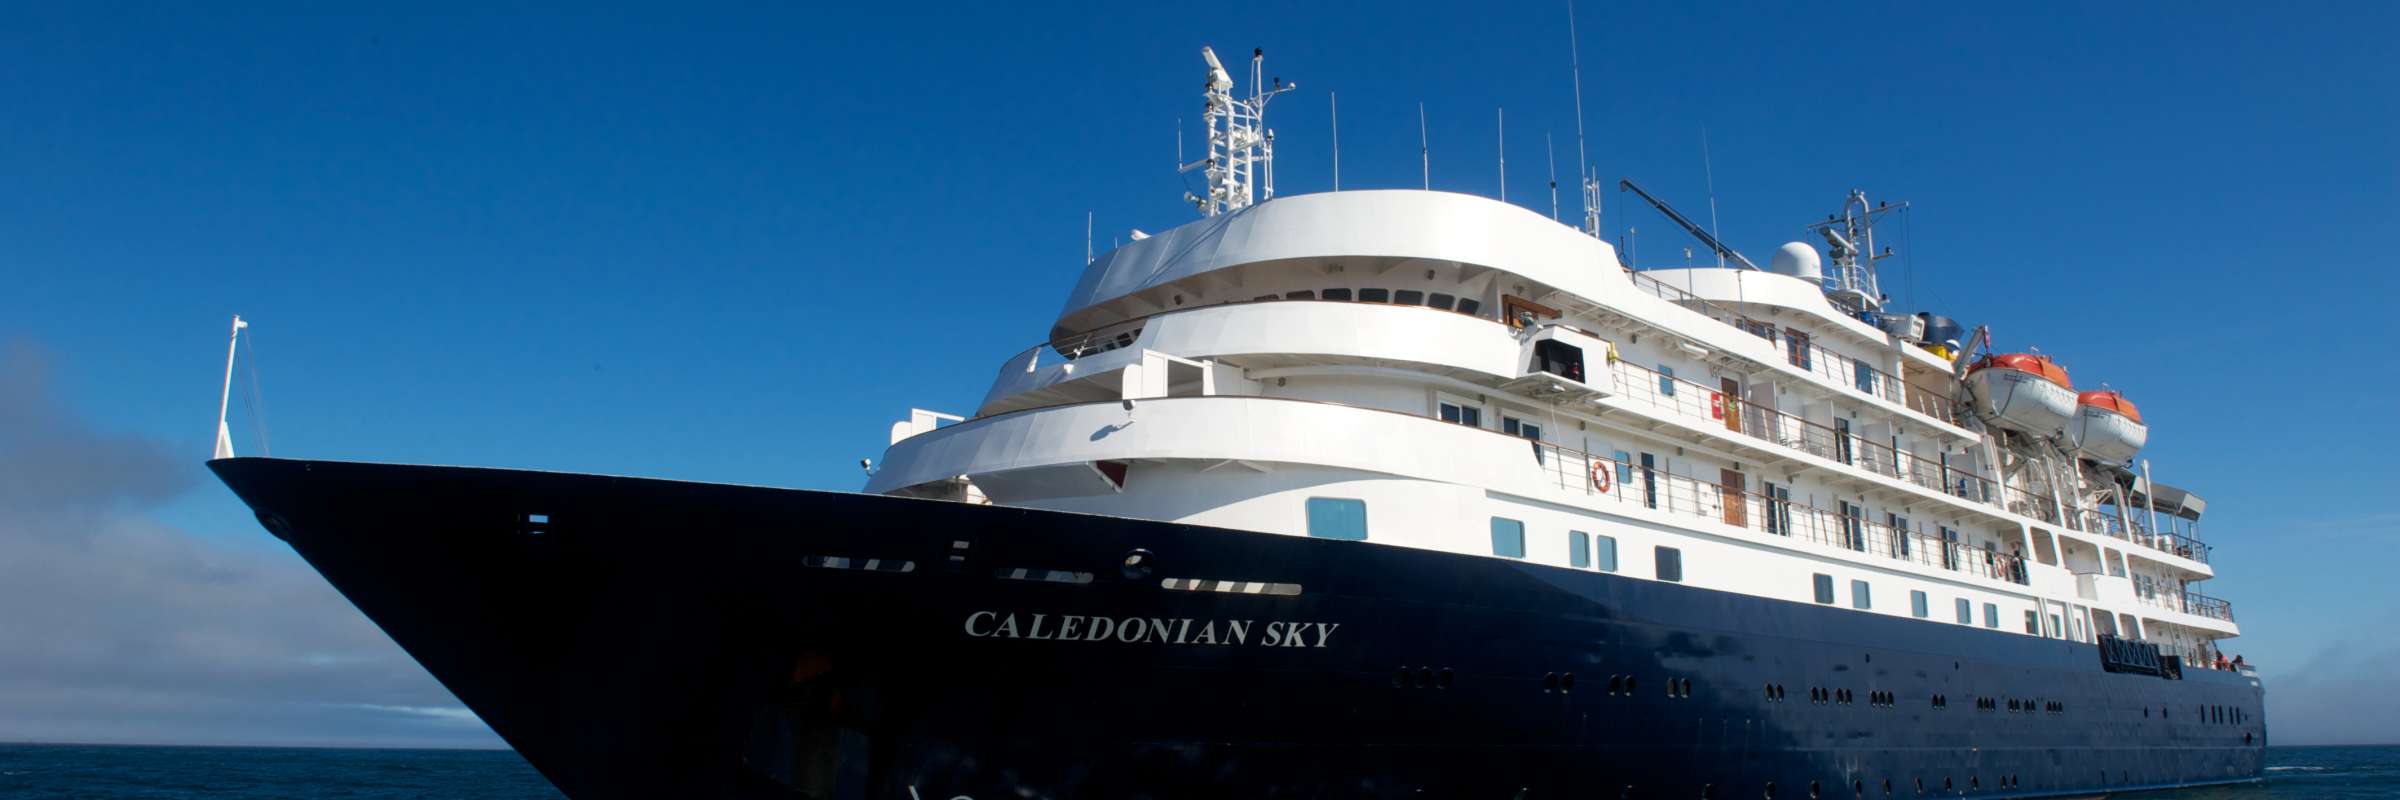 Caledonian Sky | Zegrahm Expeditions